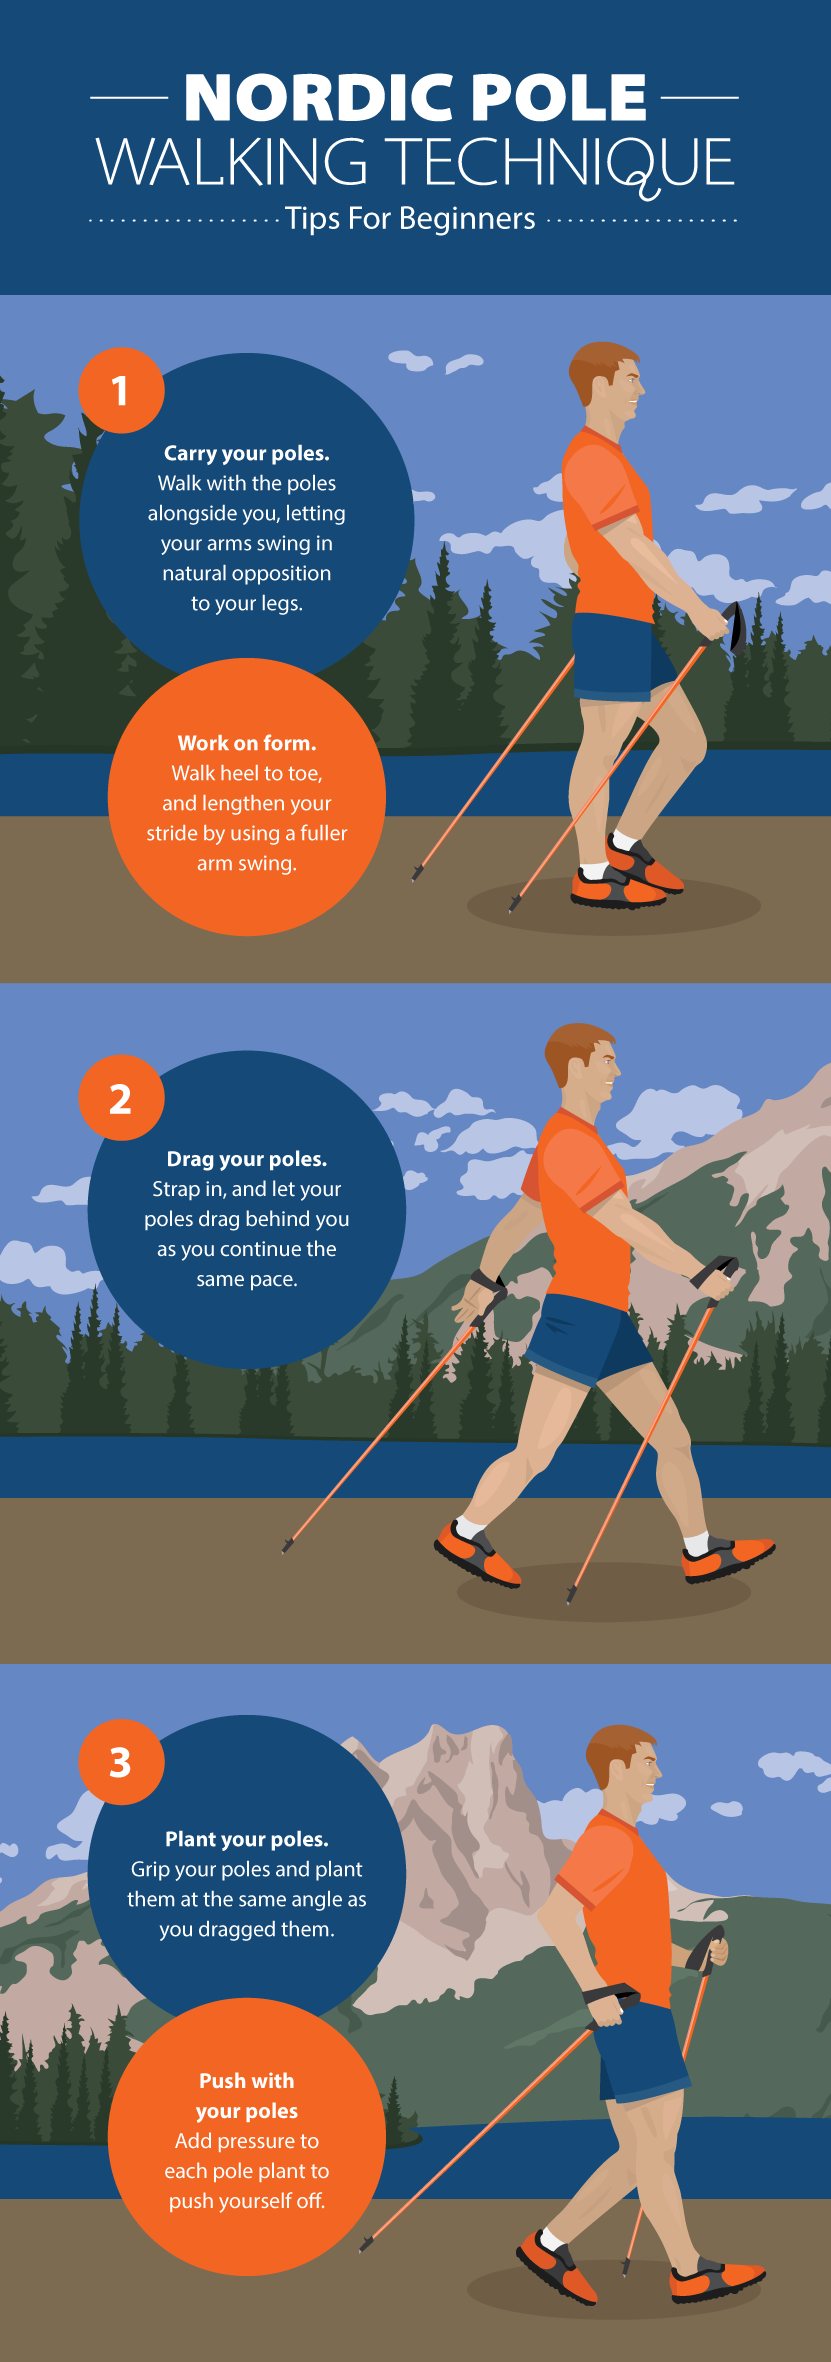 Nordic Pole Walking Technique - Beginner’s Guide to Nordic Pole Walking